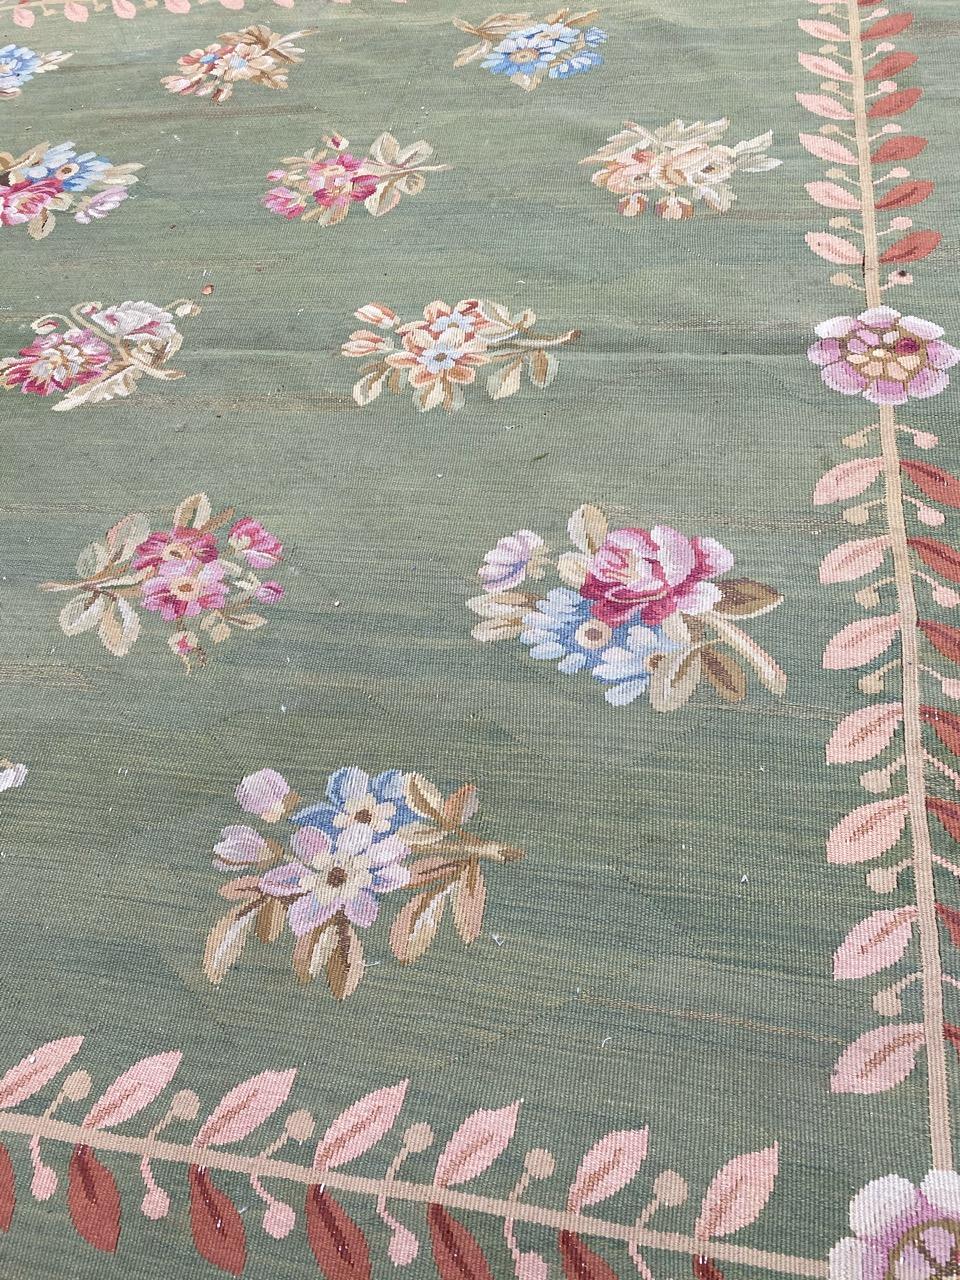 Very beautiful late 19th century French Aubusson rug with beautiful floral Empire style design (First French Empire of the early 19th century), and beautiful green background color, characteristic of this style, with pink and blue, entirely hand